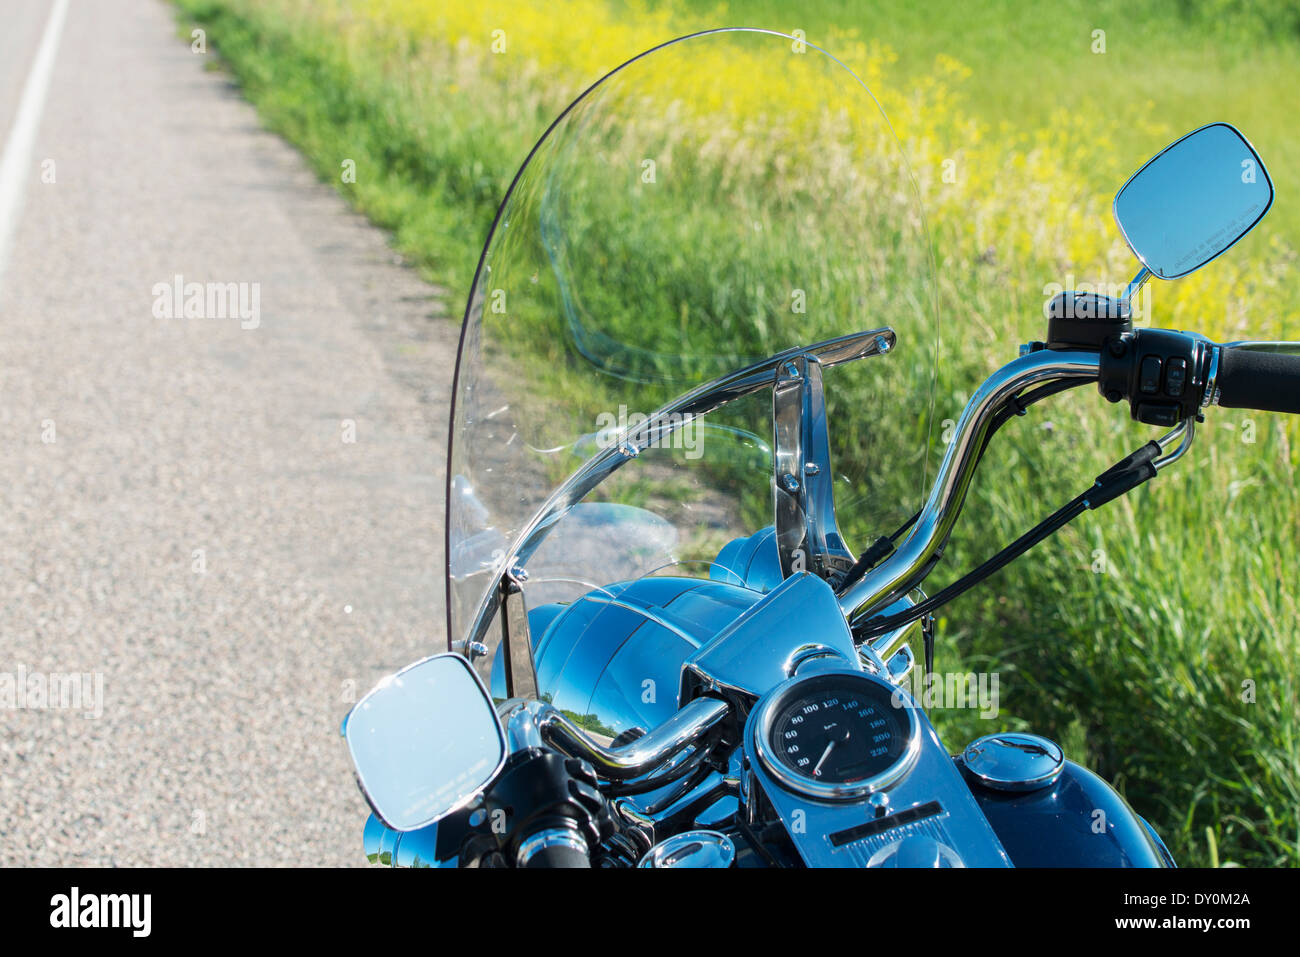 A shiny dashboard on a motorcycle parked at the side of the road; East Selkirk, Manitoba, Canada Stock Photo